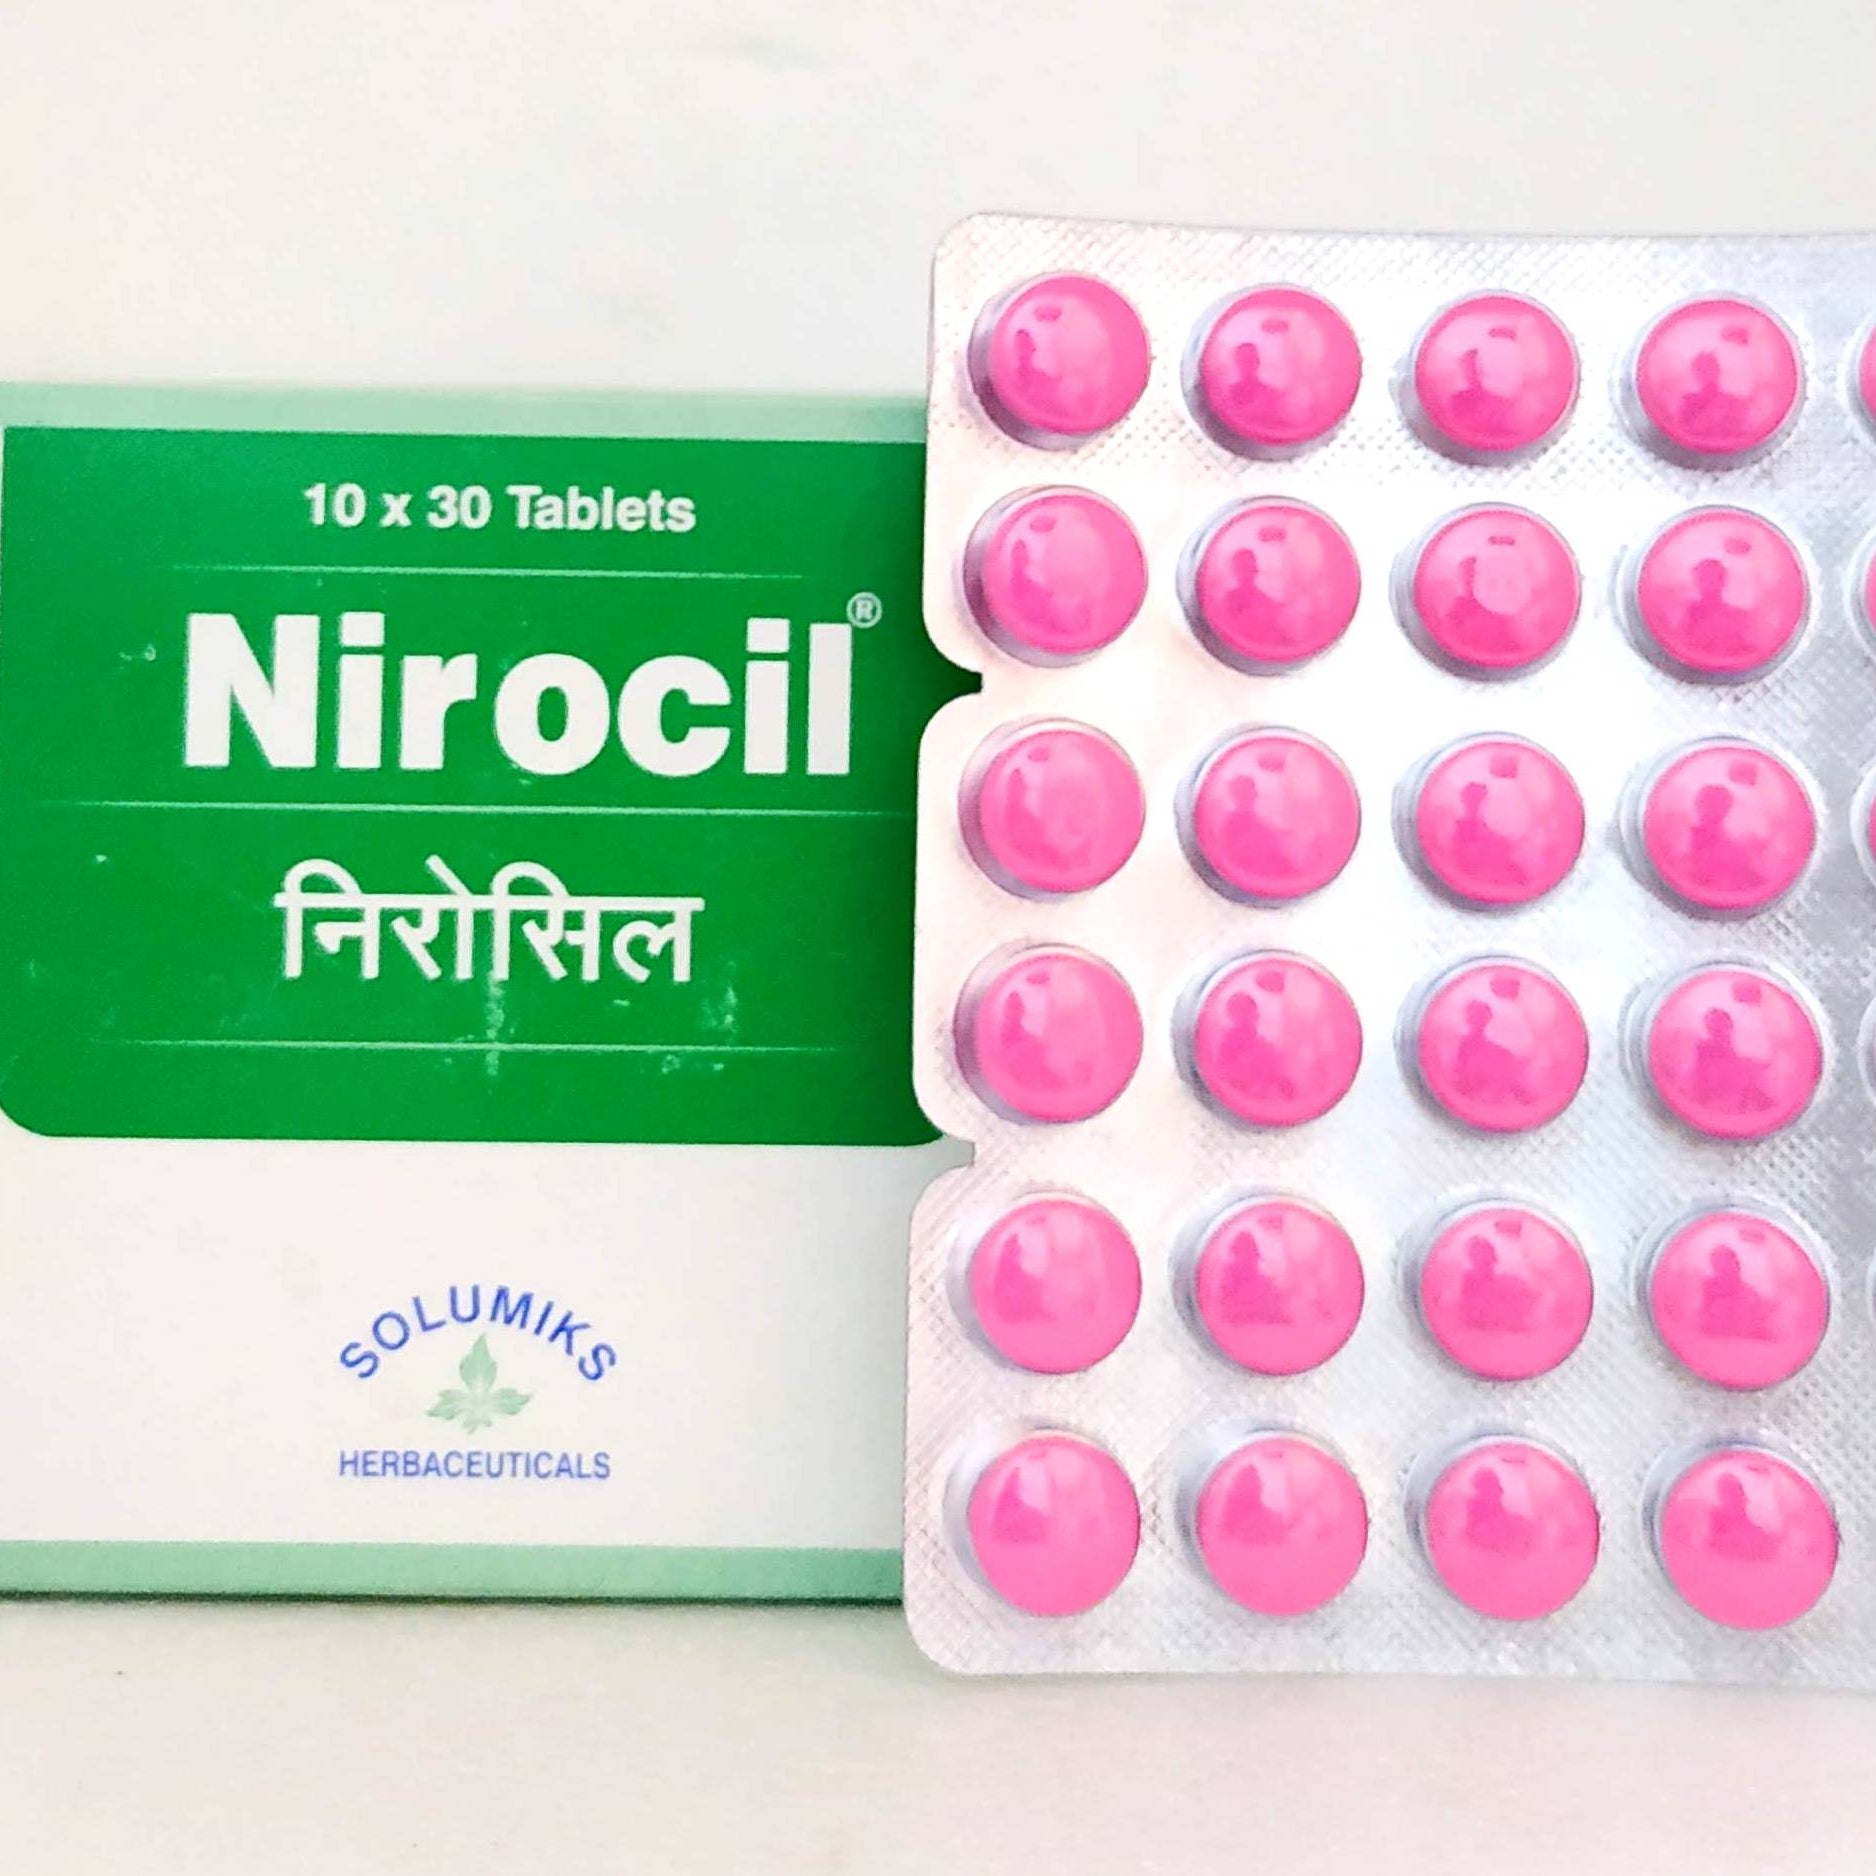 Shop Nirocil Tablets - 30Tablets at price 165.00 from Solumiks Online - Ayush Care